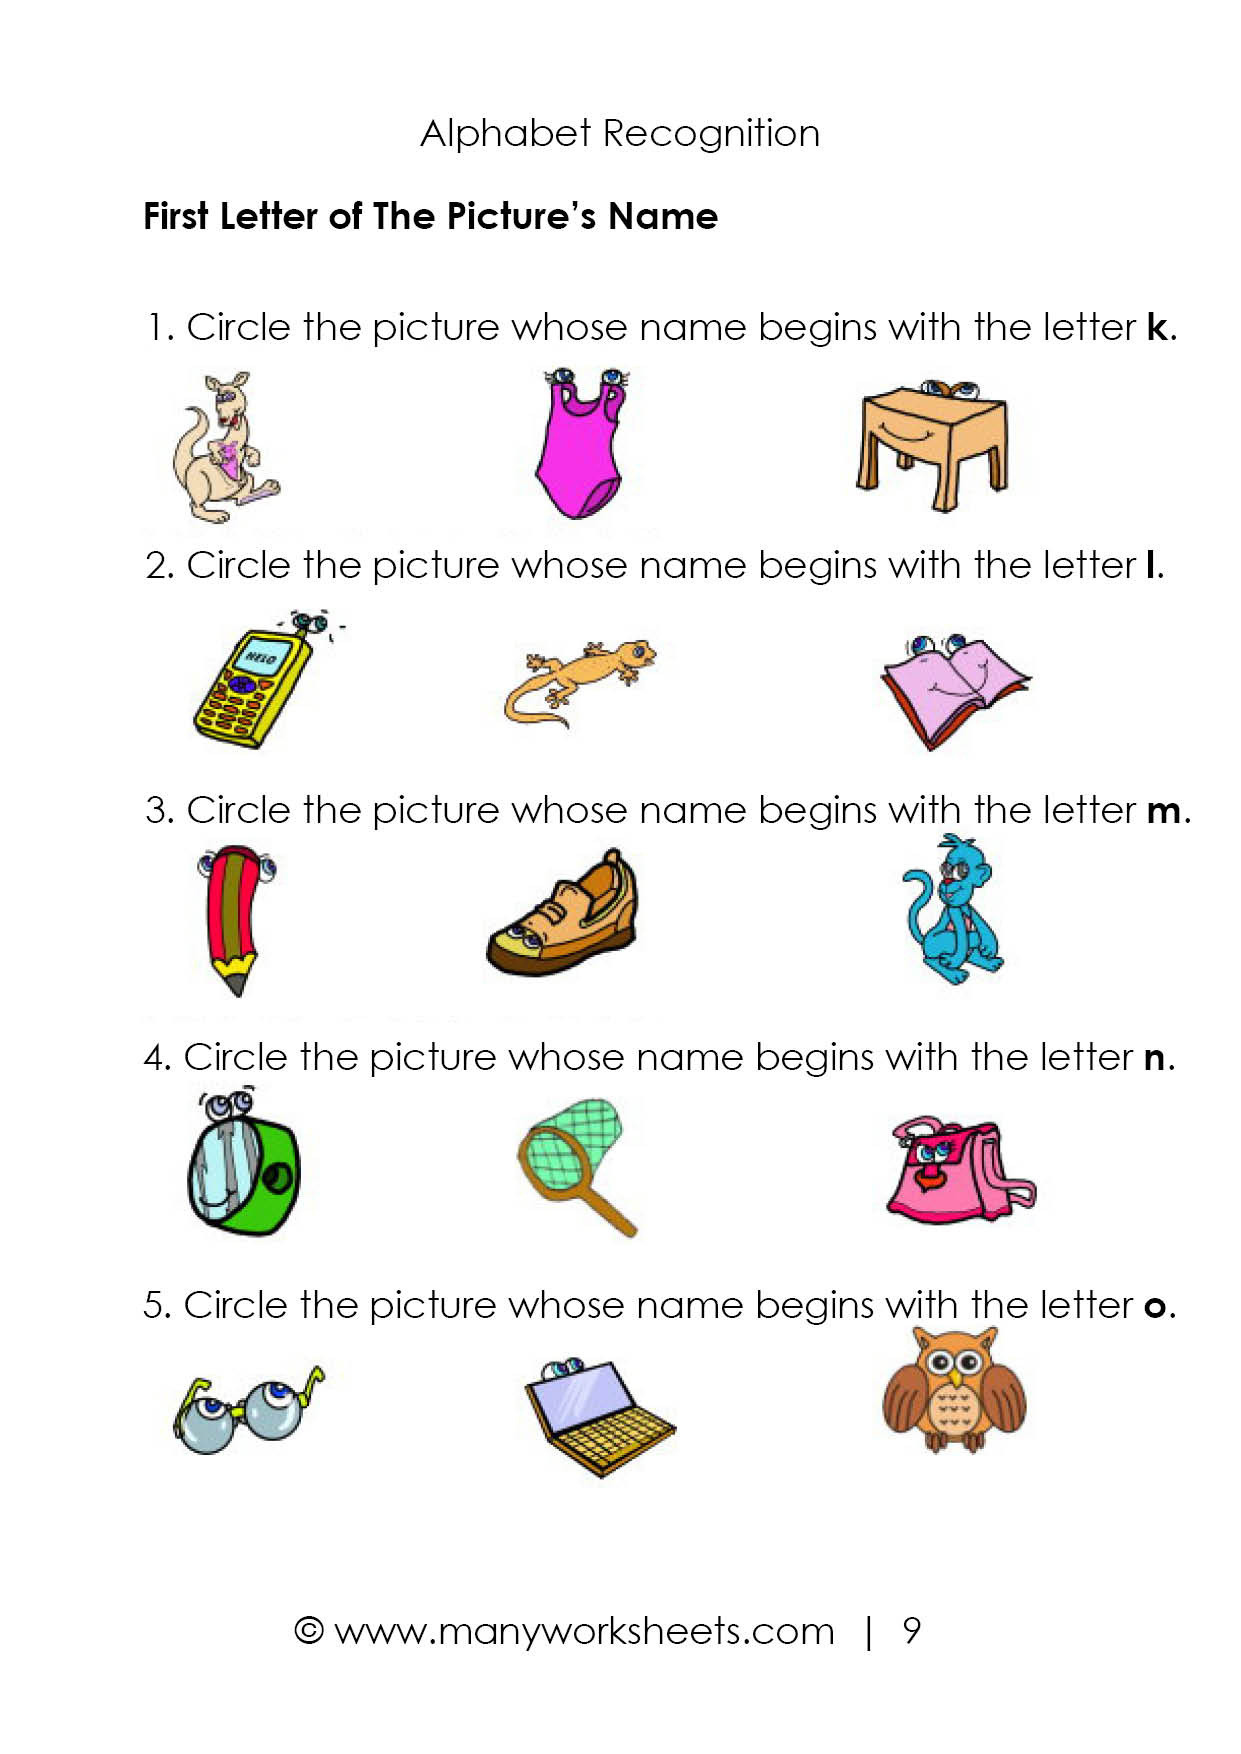 Alphabet Recognition Worksheets Photos Alphabet Collections Db excel